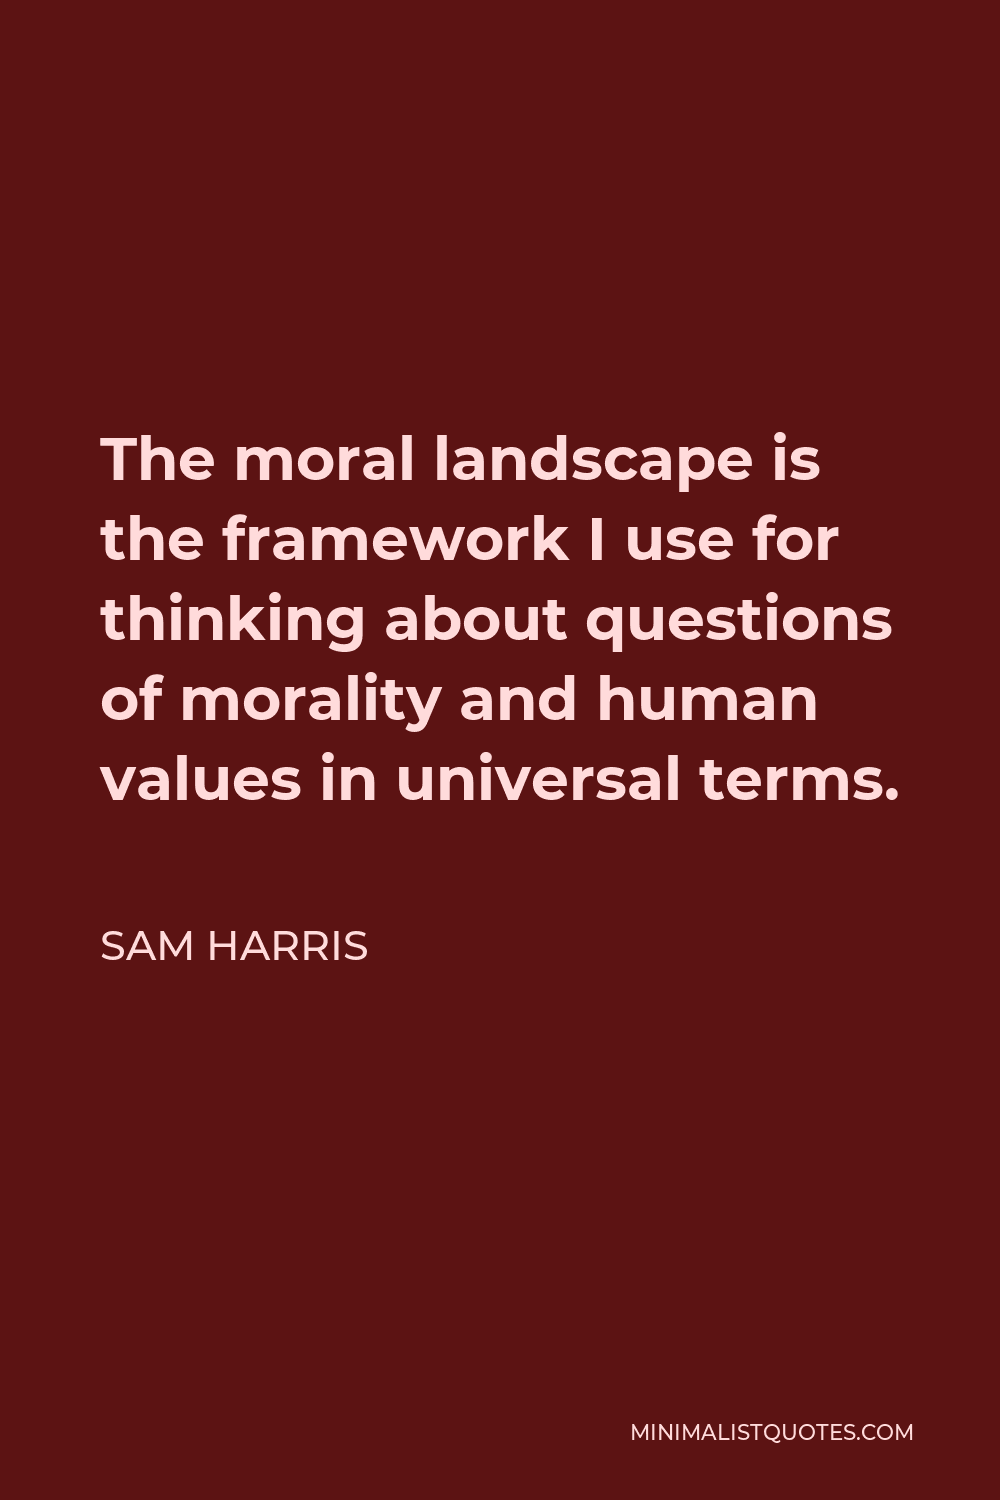 Sam Harris Quote The Moral Landscape Is The Framework I Use For Thinking About Questions Of 9378